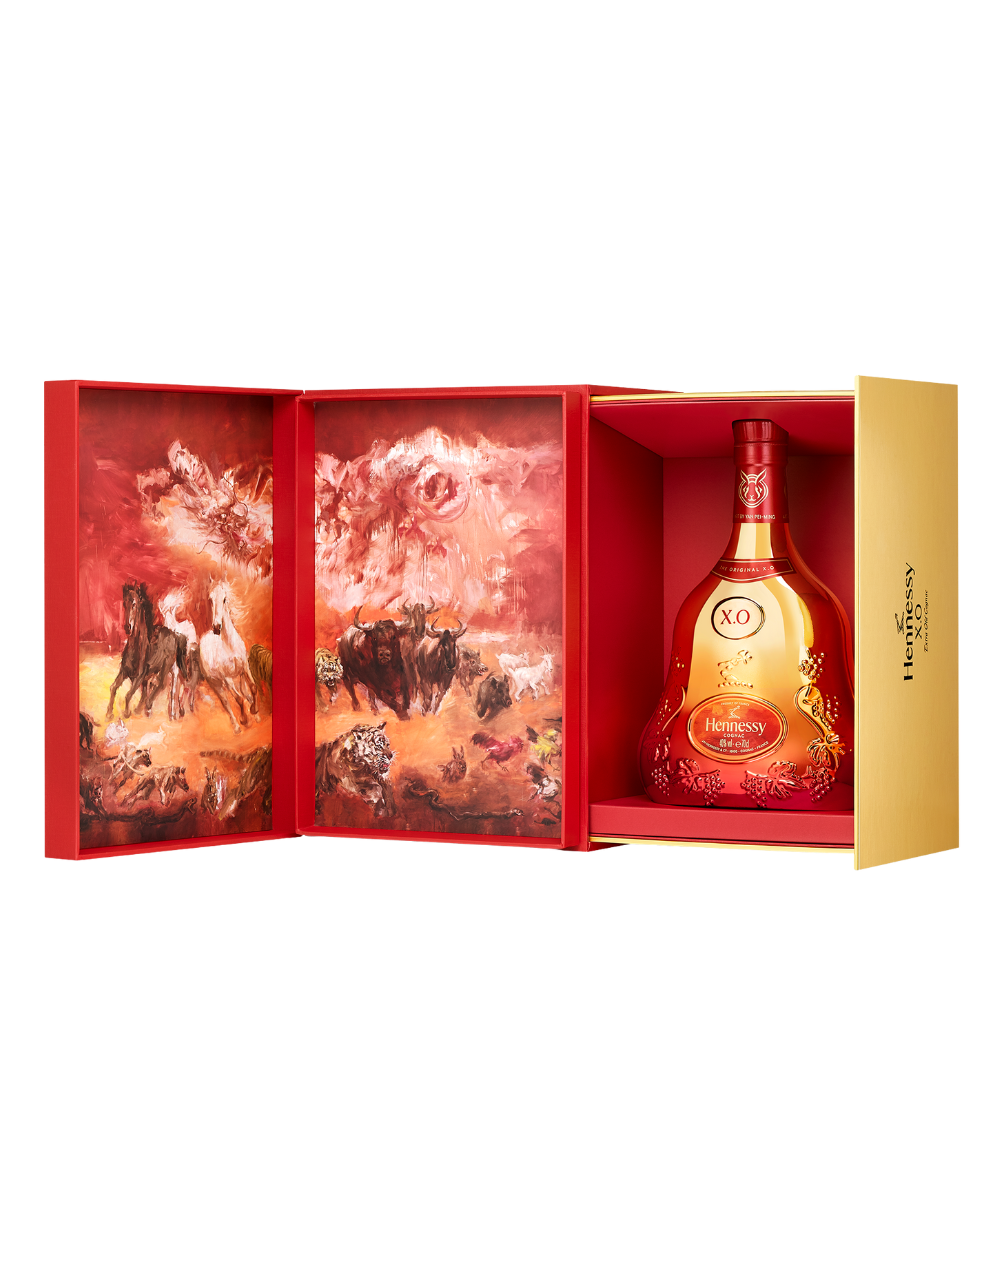 Old cognac Hennessy X.X.O 75 cl 40% with box